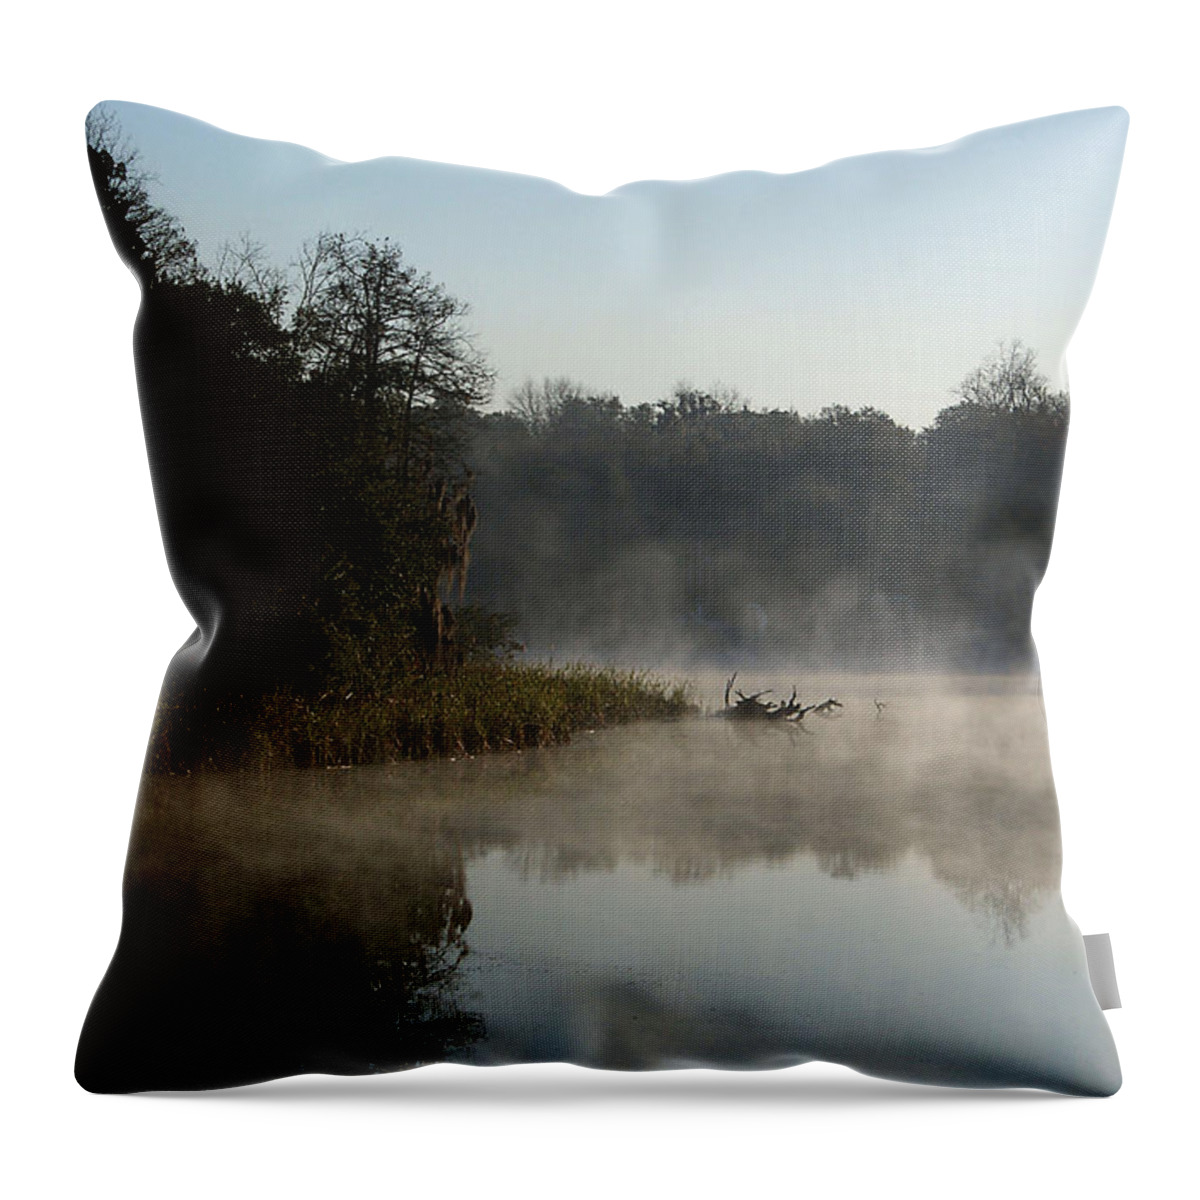 Alafia River Throw Pillow featuring the photograph Alafia River by Chauncy Holmes